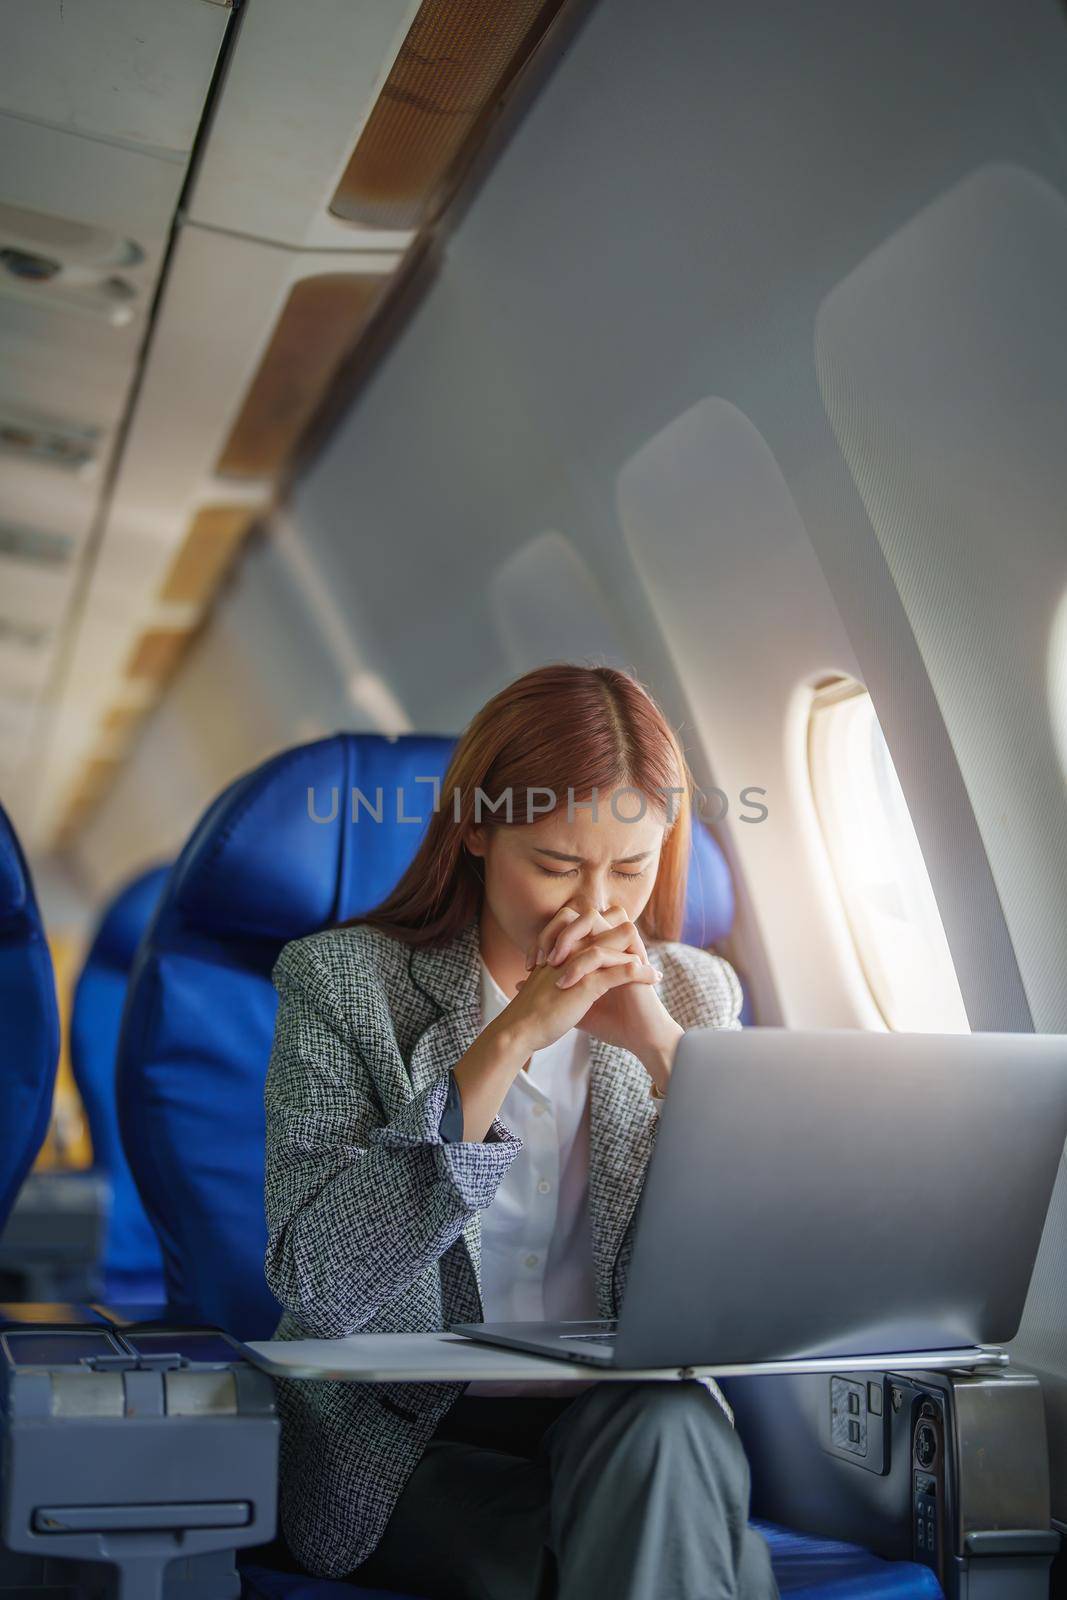 portrait of a successful Asian businesswoman or entrepreneur in a formal suit on an airplane seated in Business Class shows a thoughtful and stressed face with using laptop during the flight by Manastrong